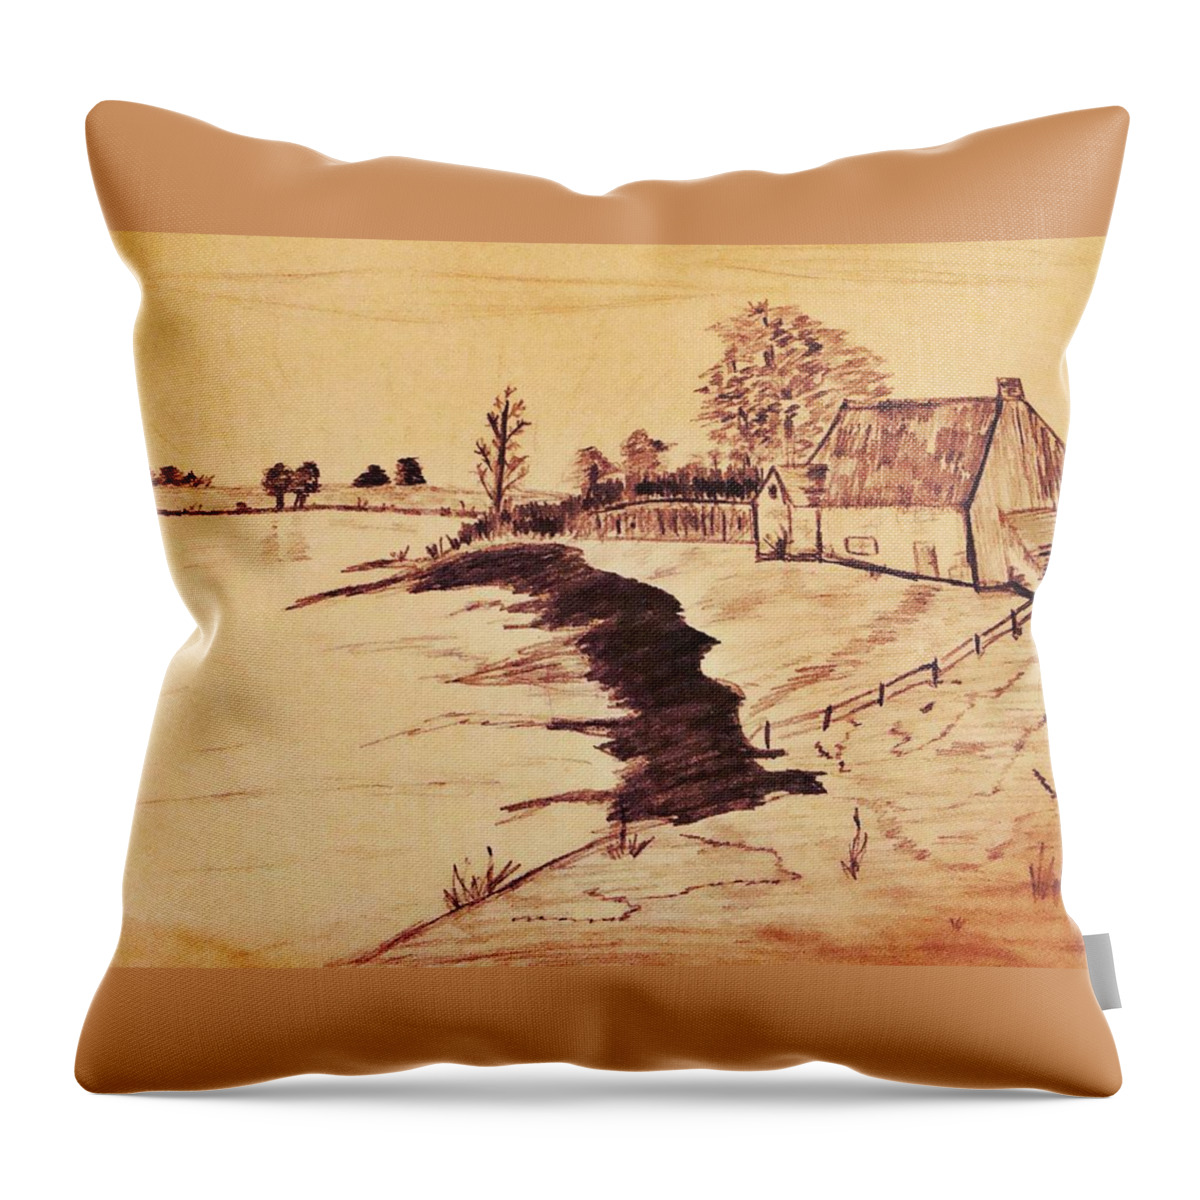 Drawing Throw Pillow featuring the drawing The Old Homestaed by Stacie Siemsen